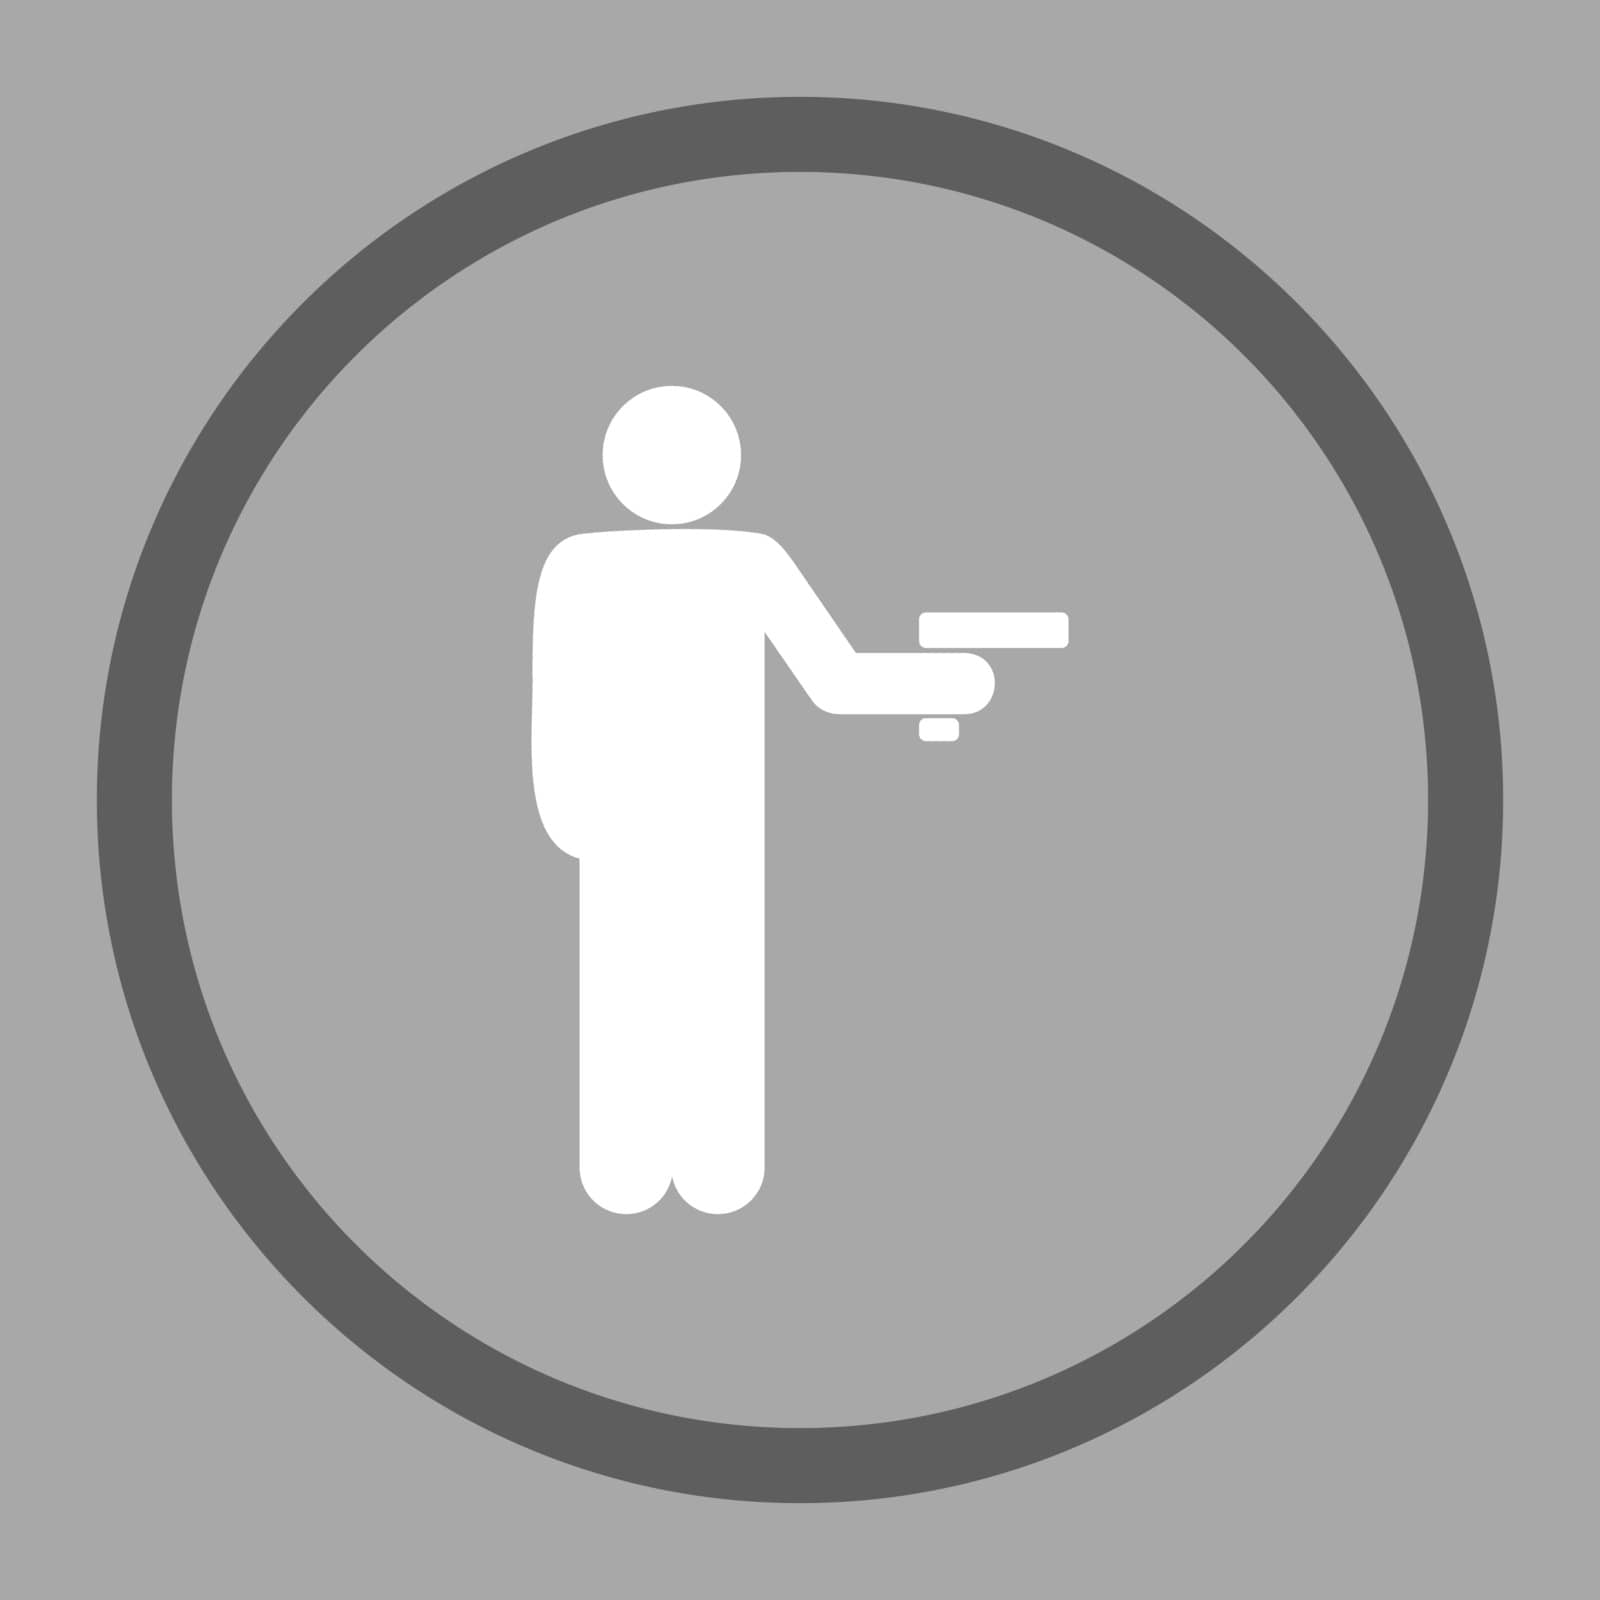 Robbery vector icon. This rounded flat symbol is drawn with dark gray and white colors on a silver background.